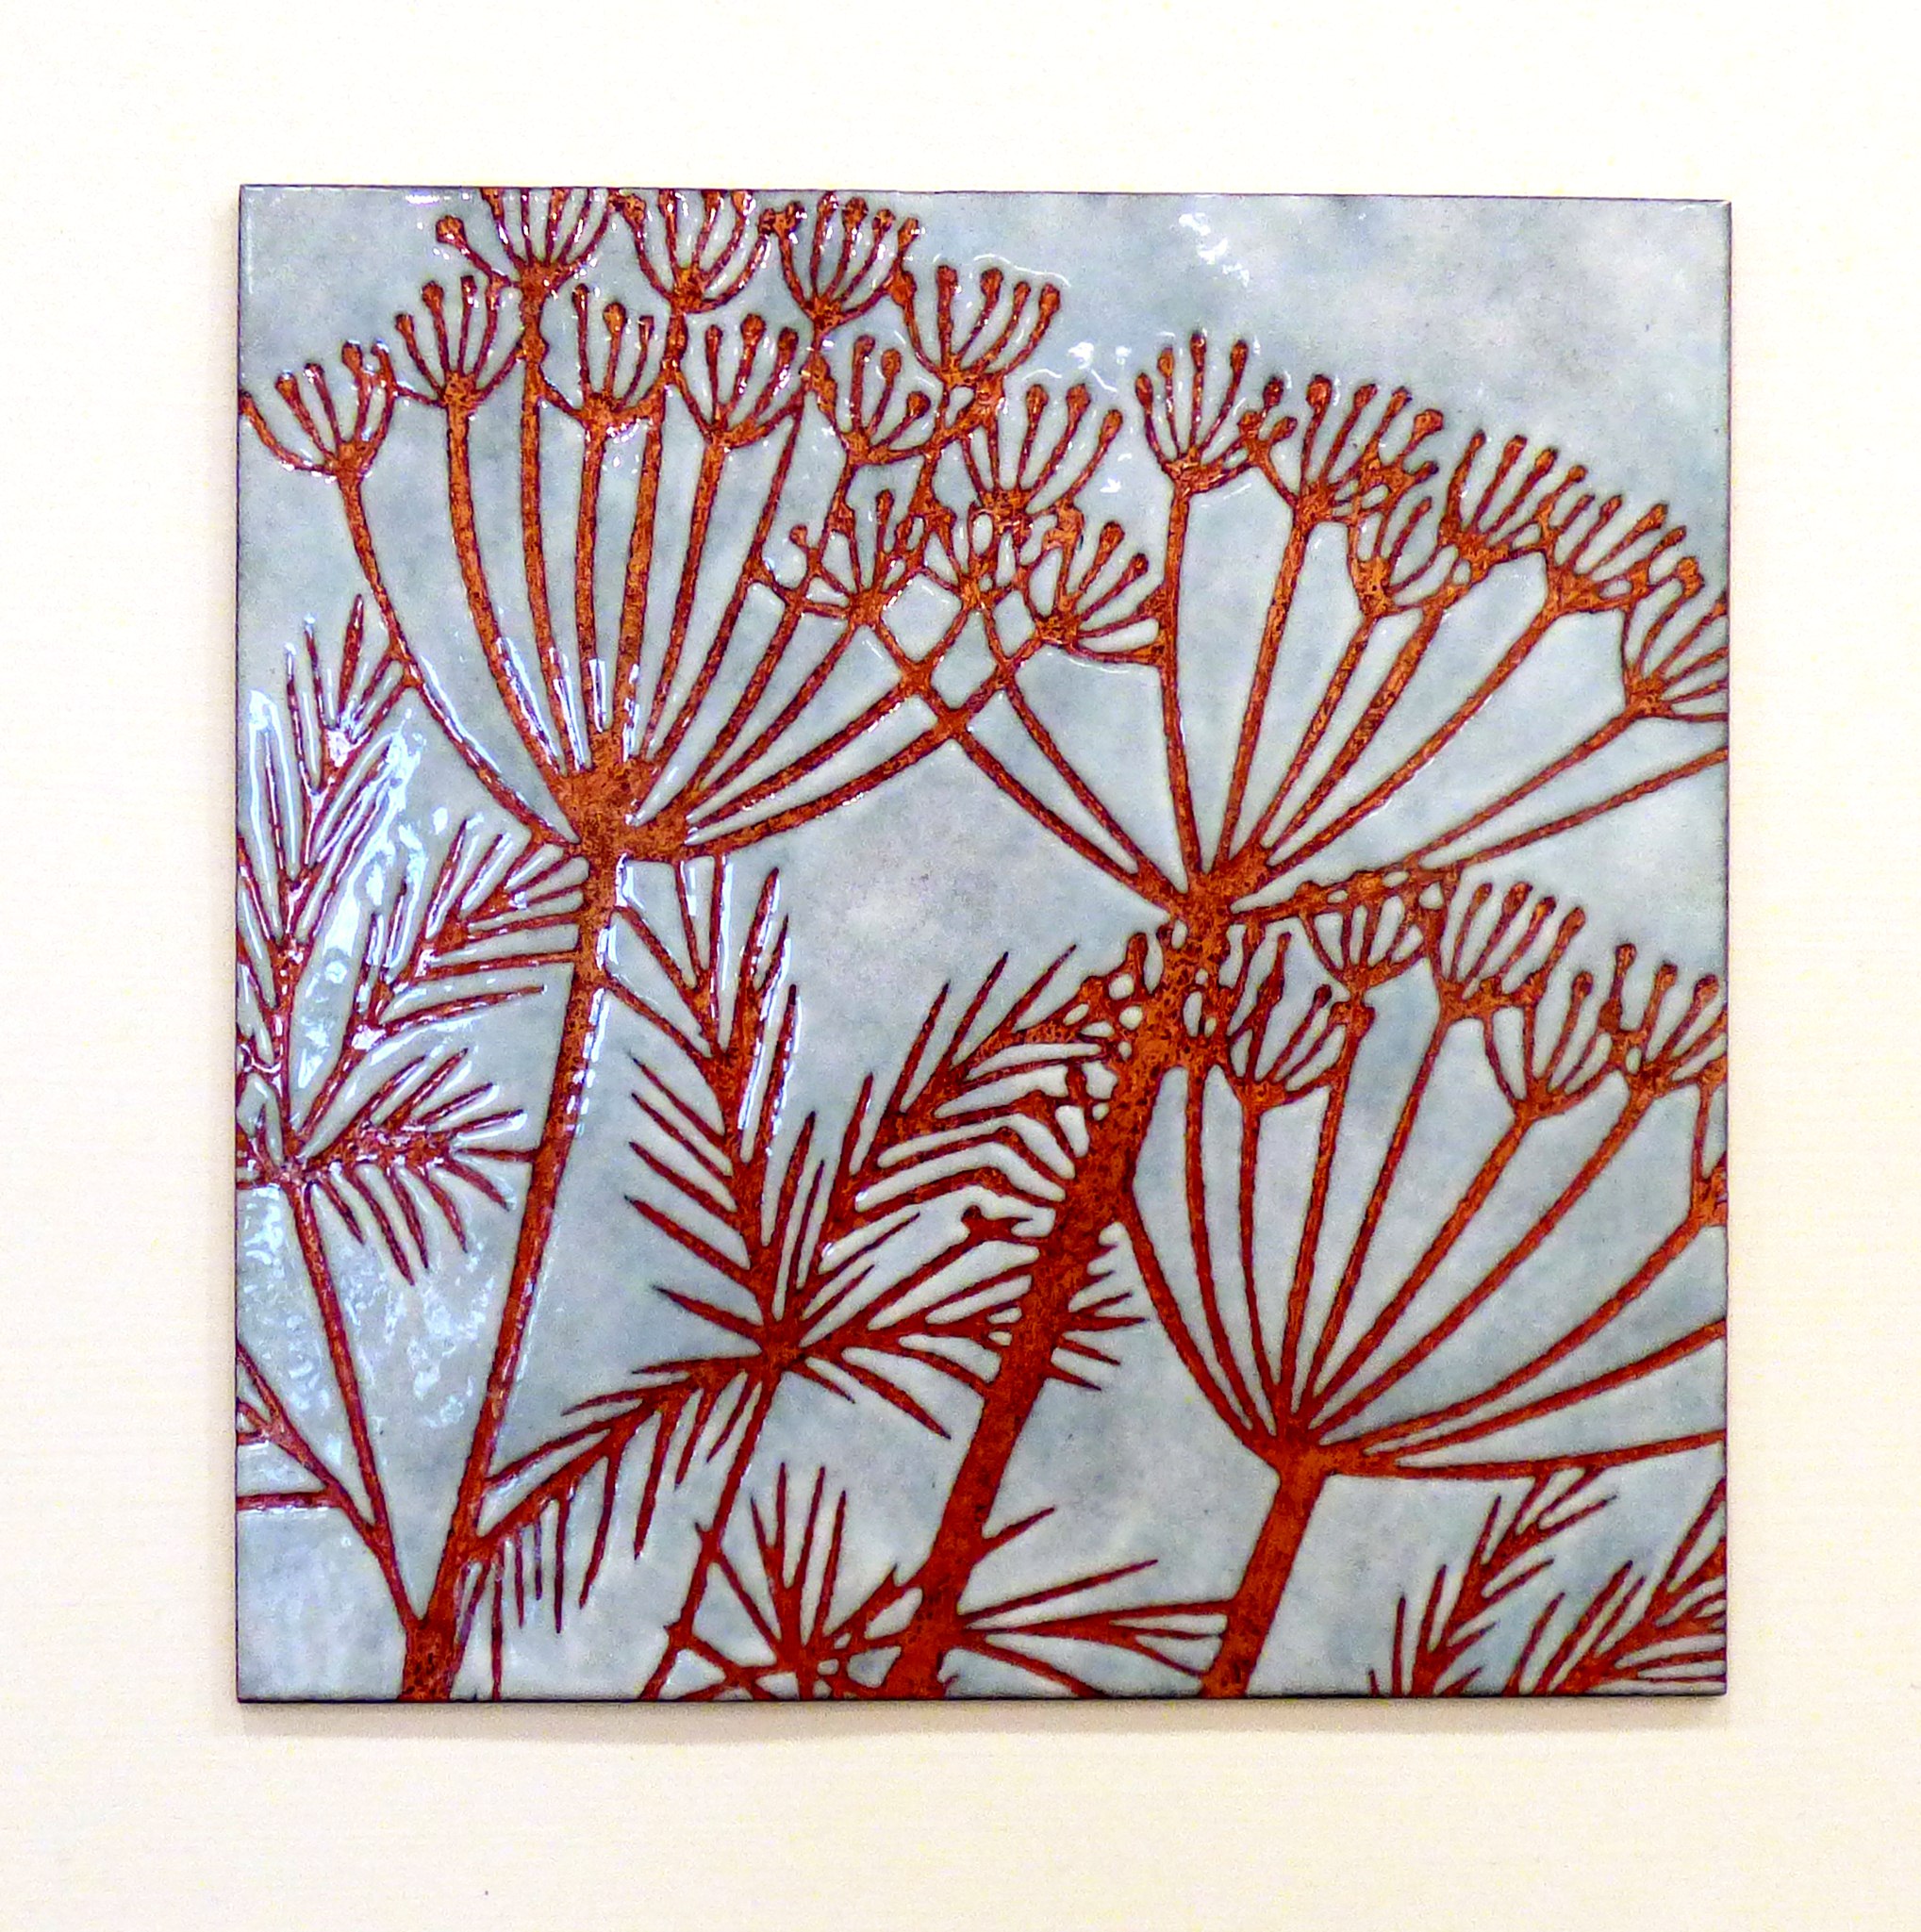 ENAMELLED PANEL 2 by Janine Partington, CRAFTED exhibitioin, Kirkby Gallery, 2016